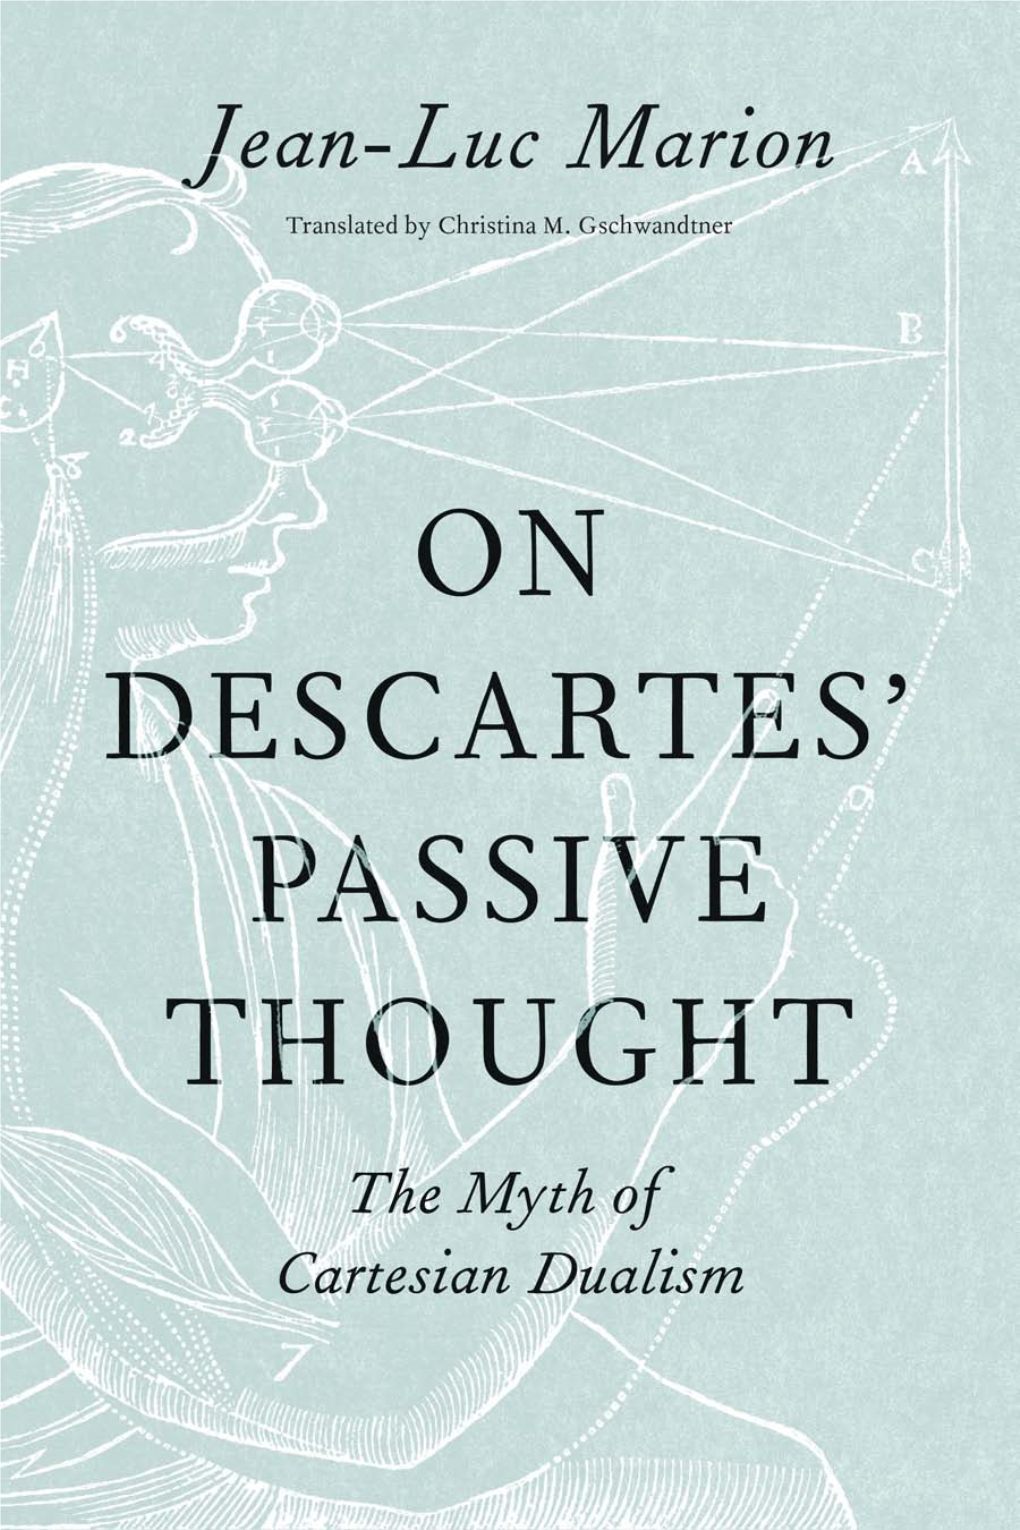 On Descartes' Passive Thought